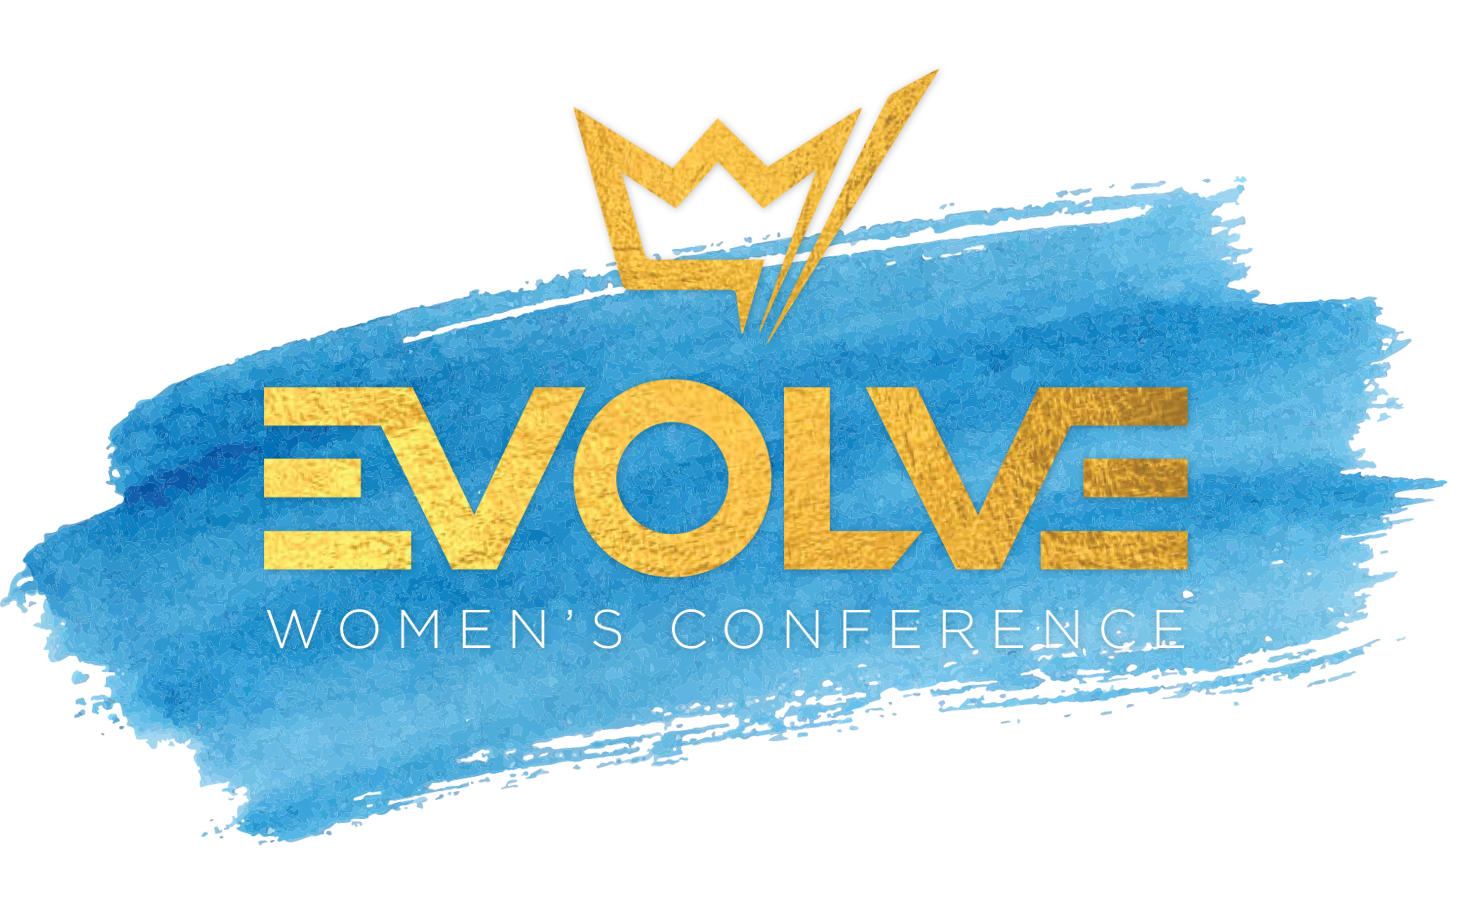 Evolve Women’s Conference 2019 1 in 3 Foundation